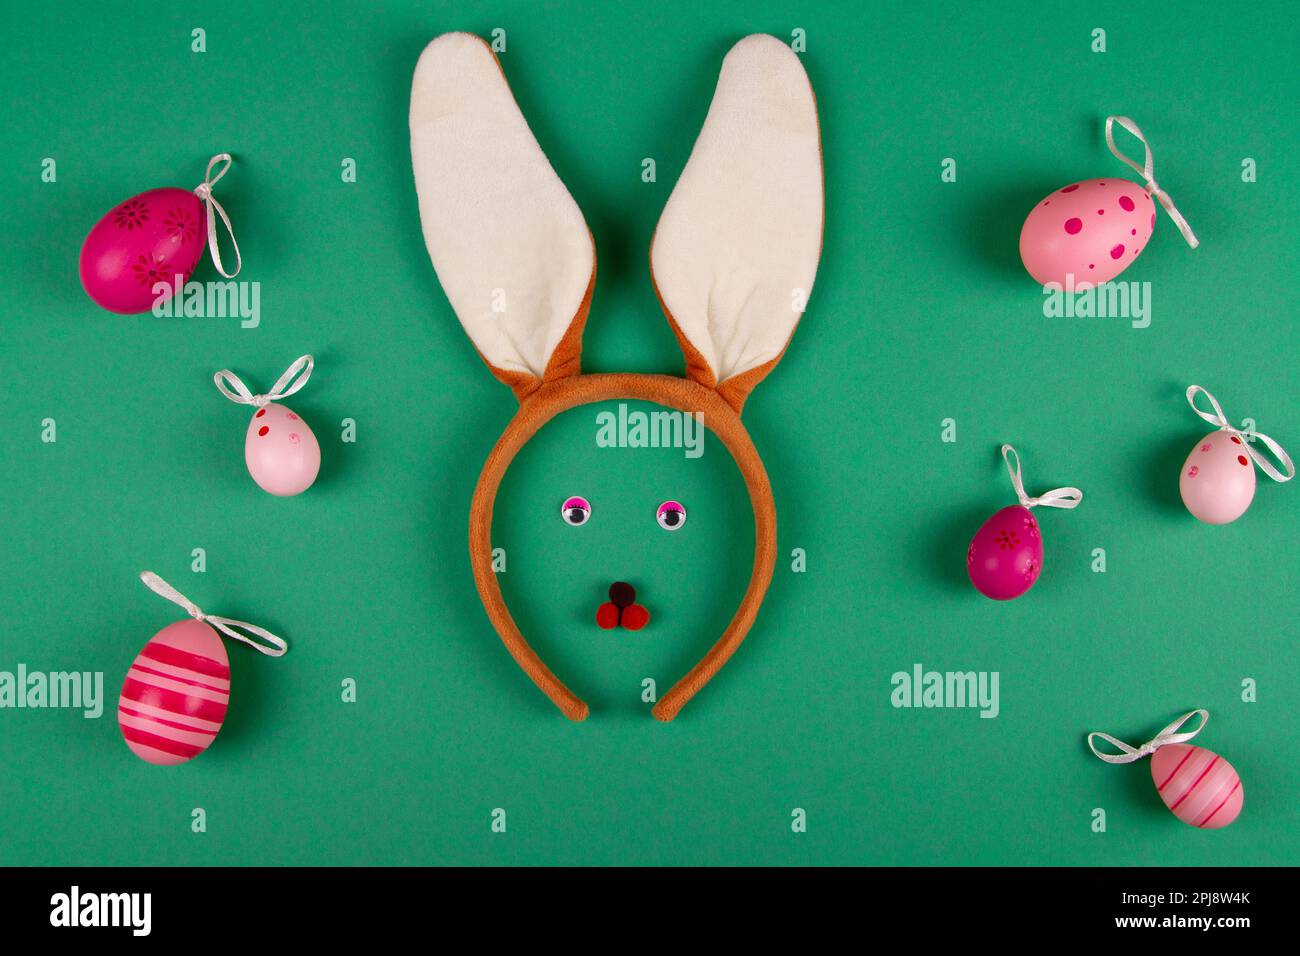 Humorous green Easter-themed backdrop adorned with pink eggs and a bunny visage Stock Photo